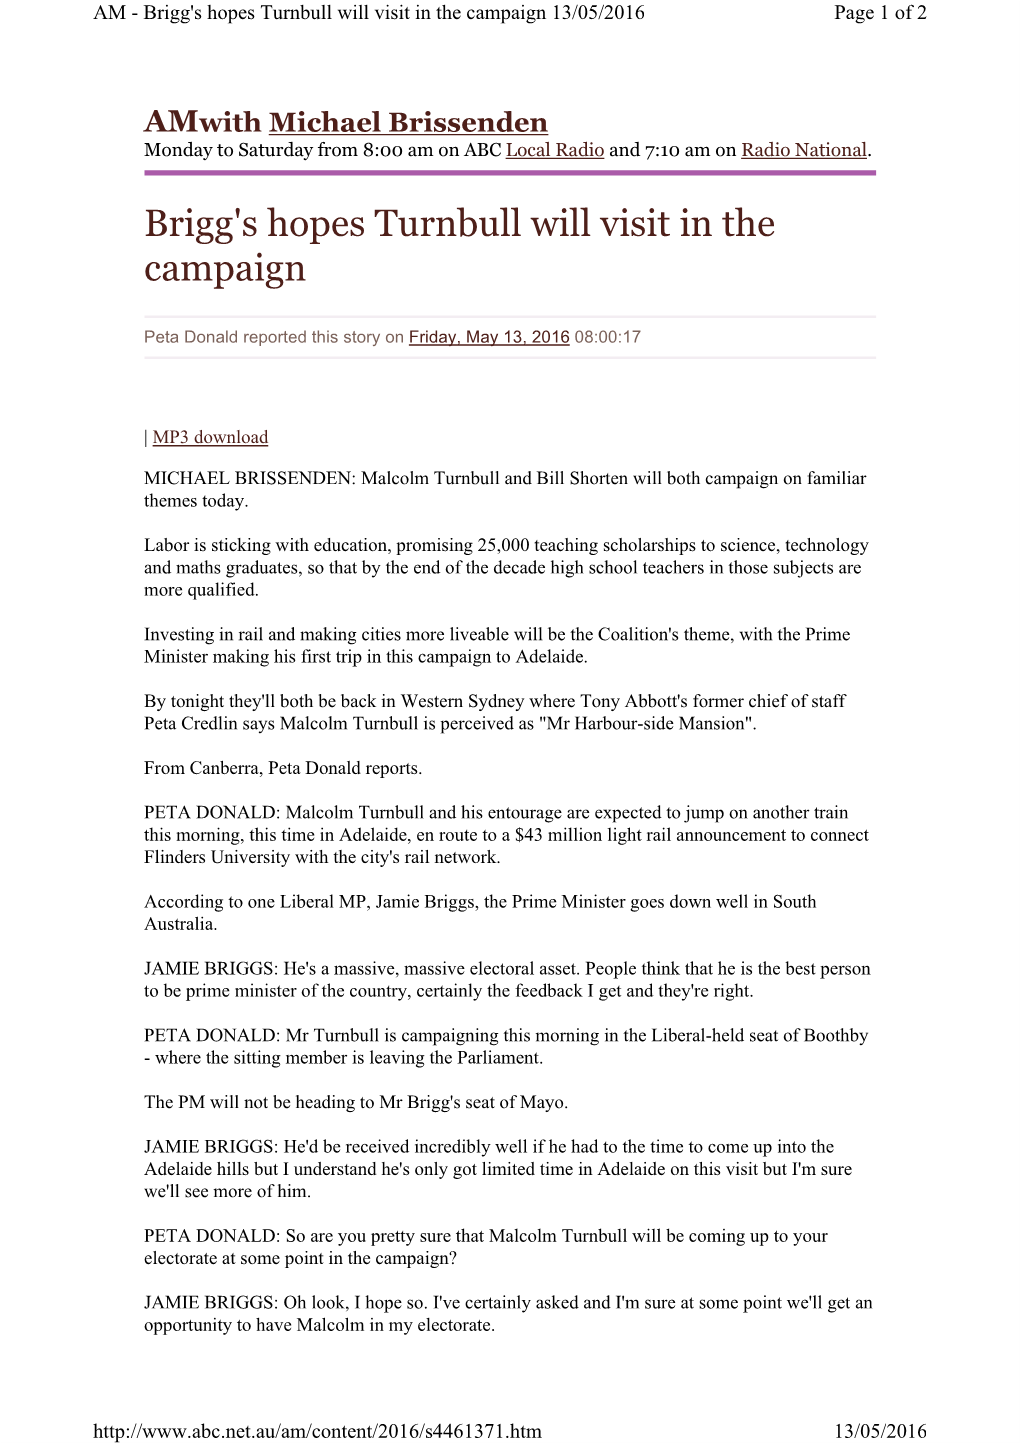 Brigg's Hopes Turnbull Will Visit in the Campaign 13/05/2016 Page 1 of 2